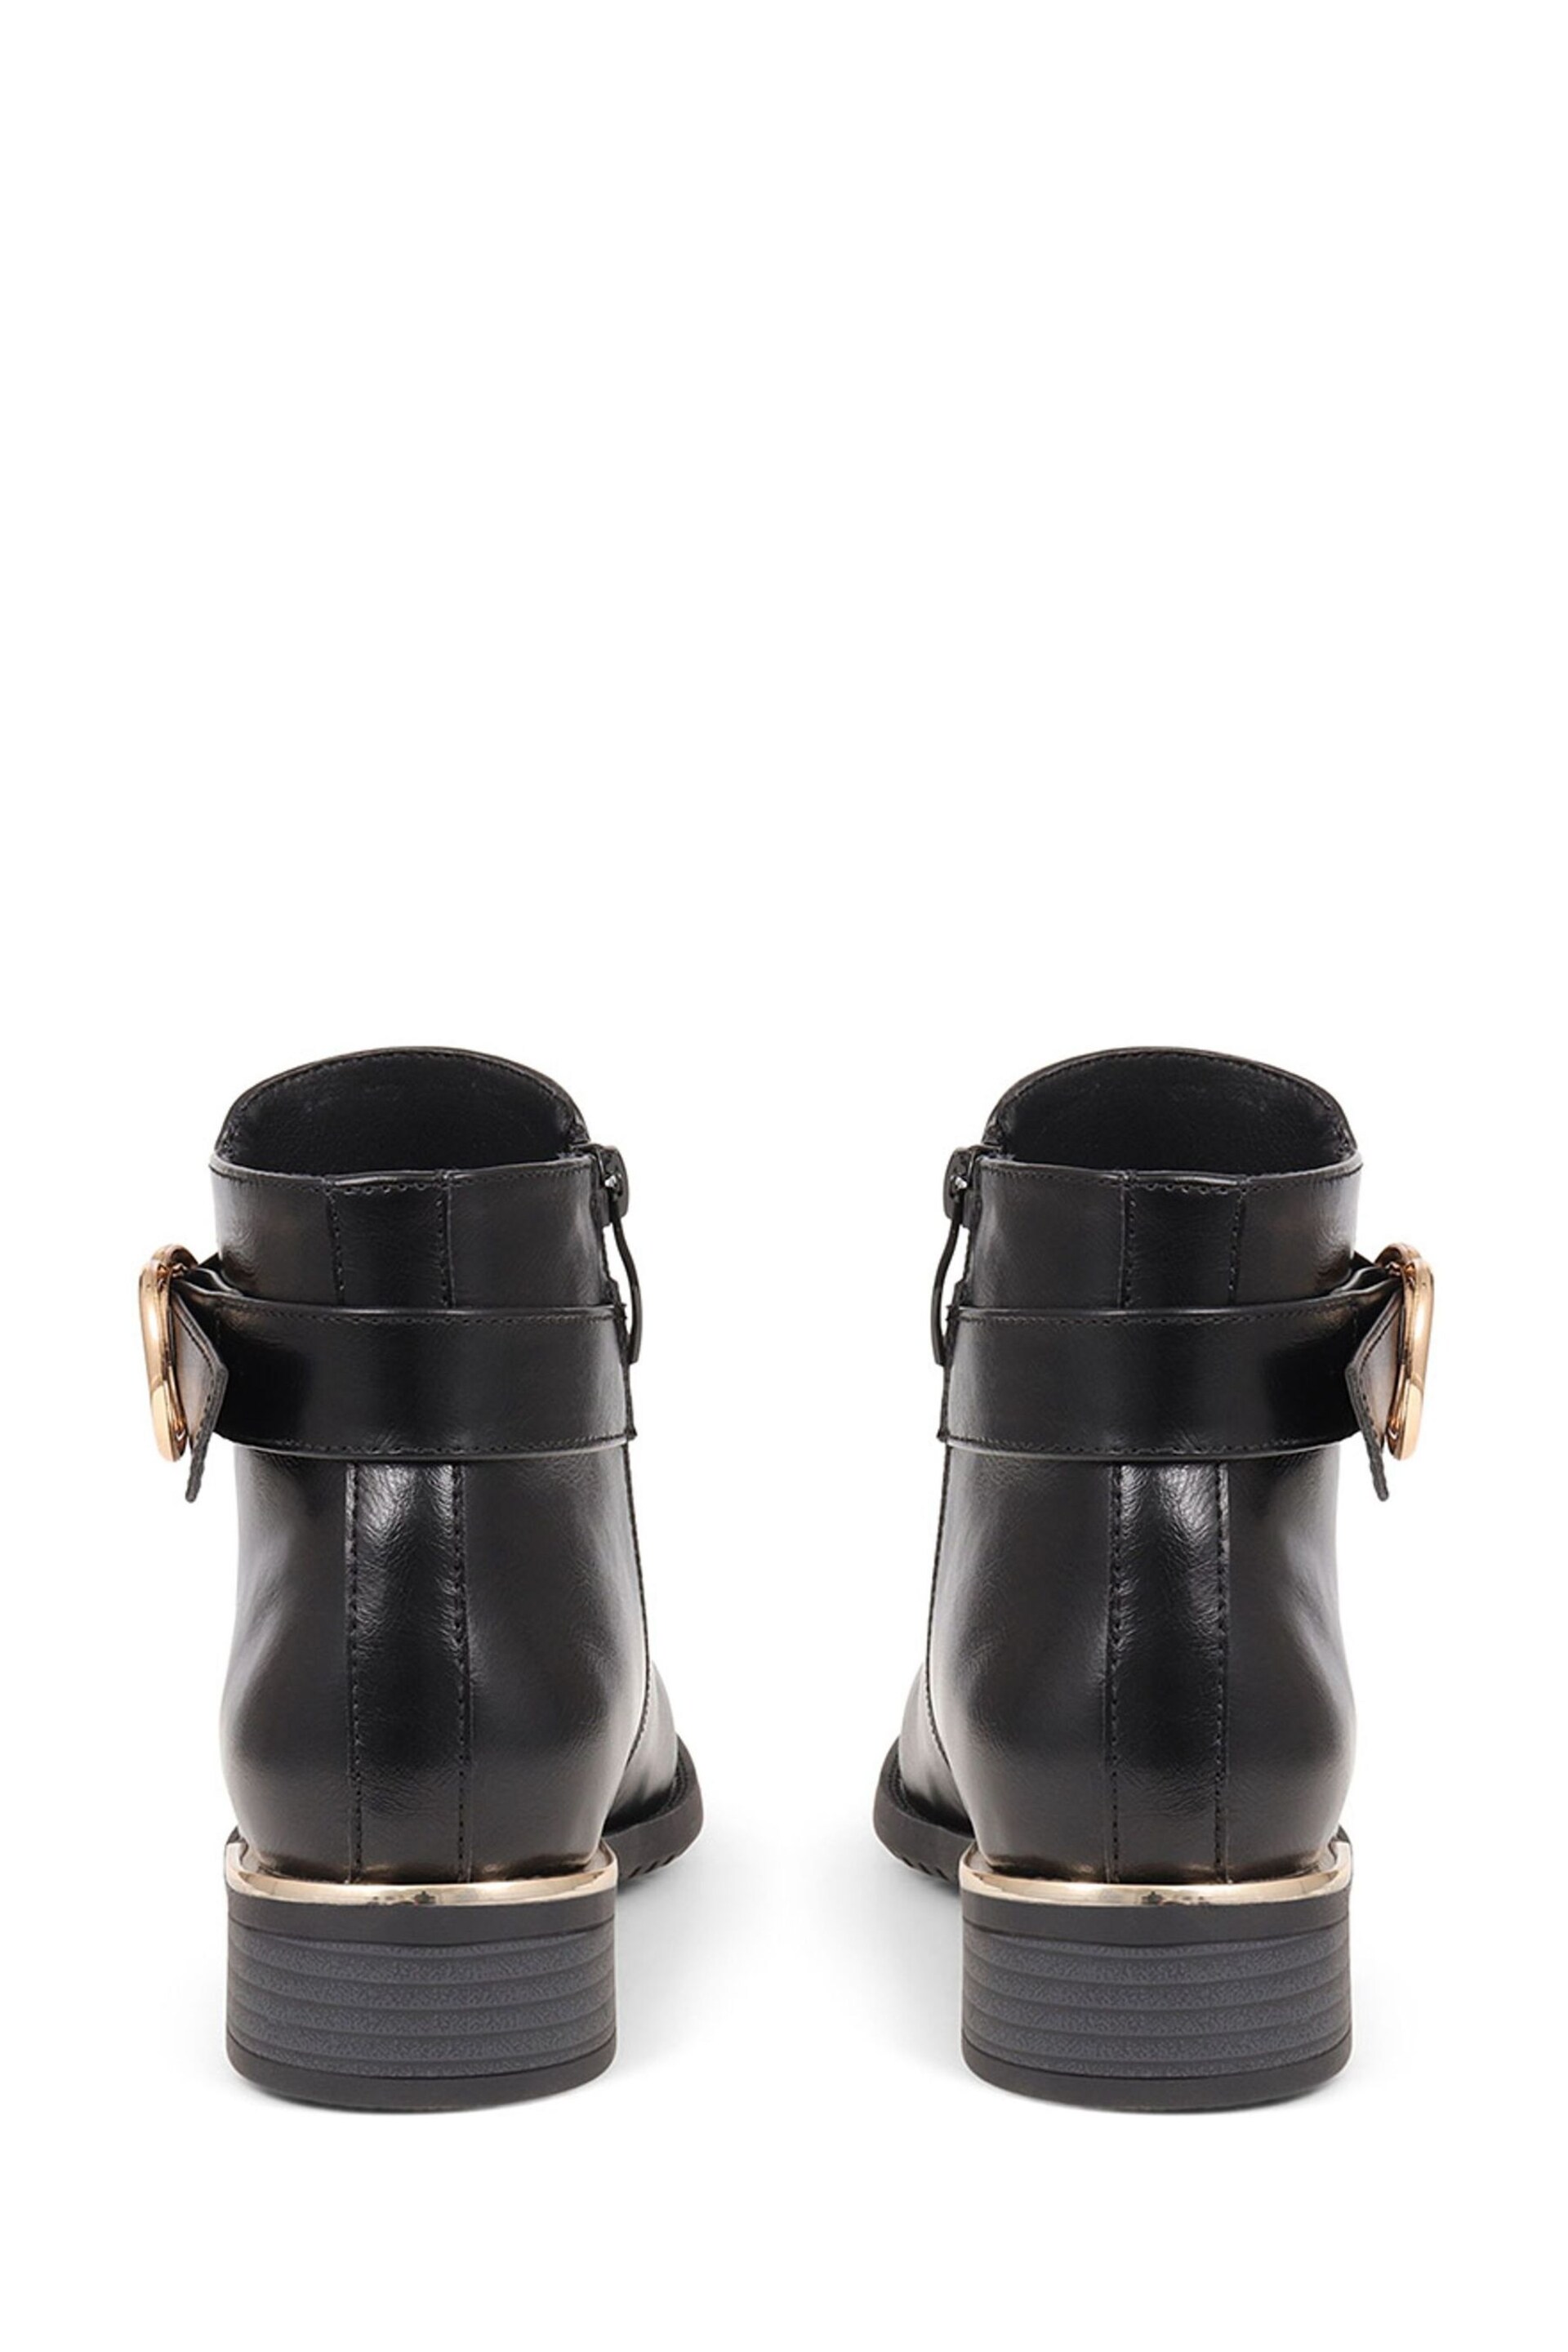 Pavers Black Buckle Detail Ankle Boots - Image 3 of 5